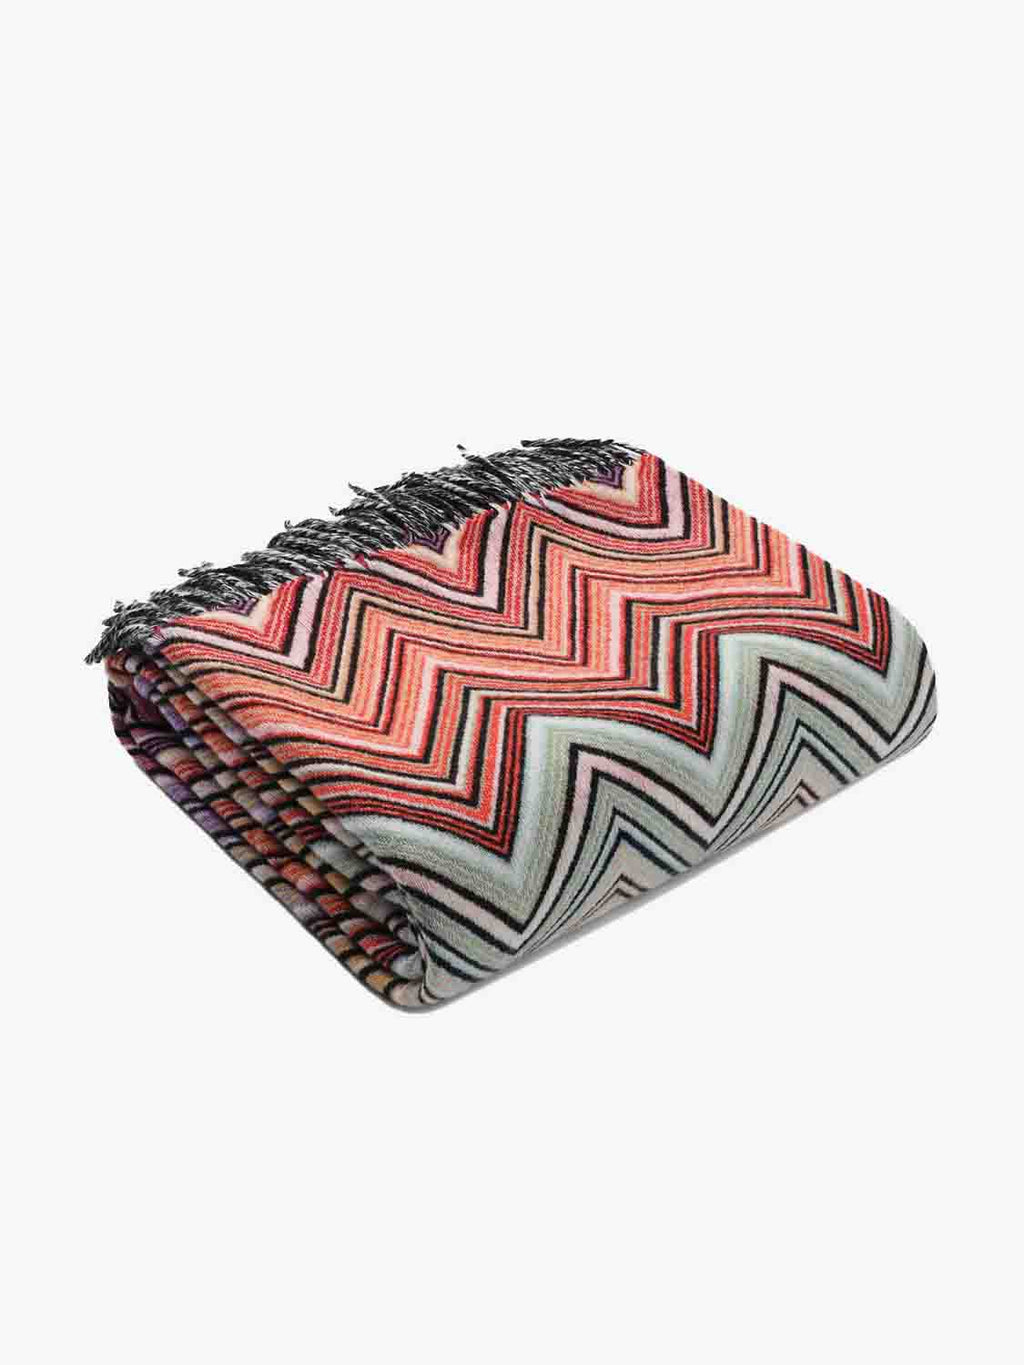 Missoni Home Perseo Throw